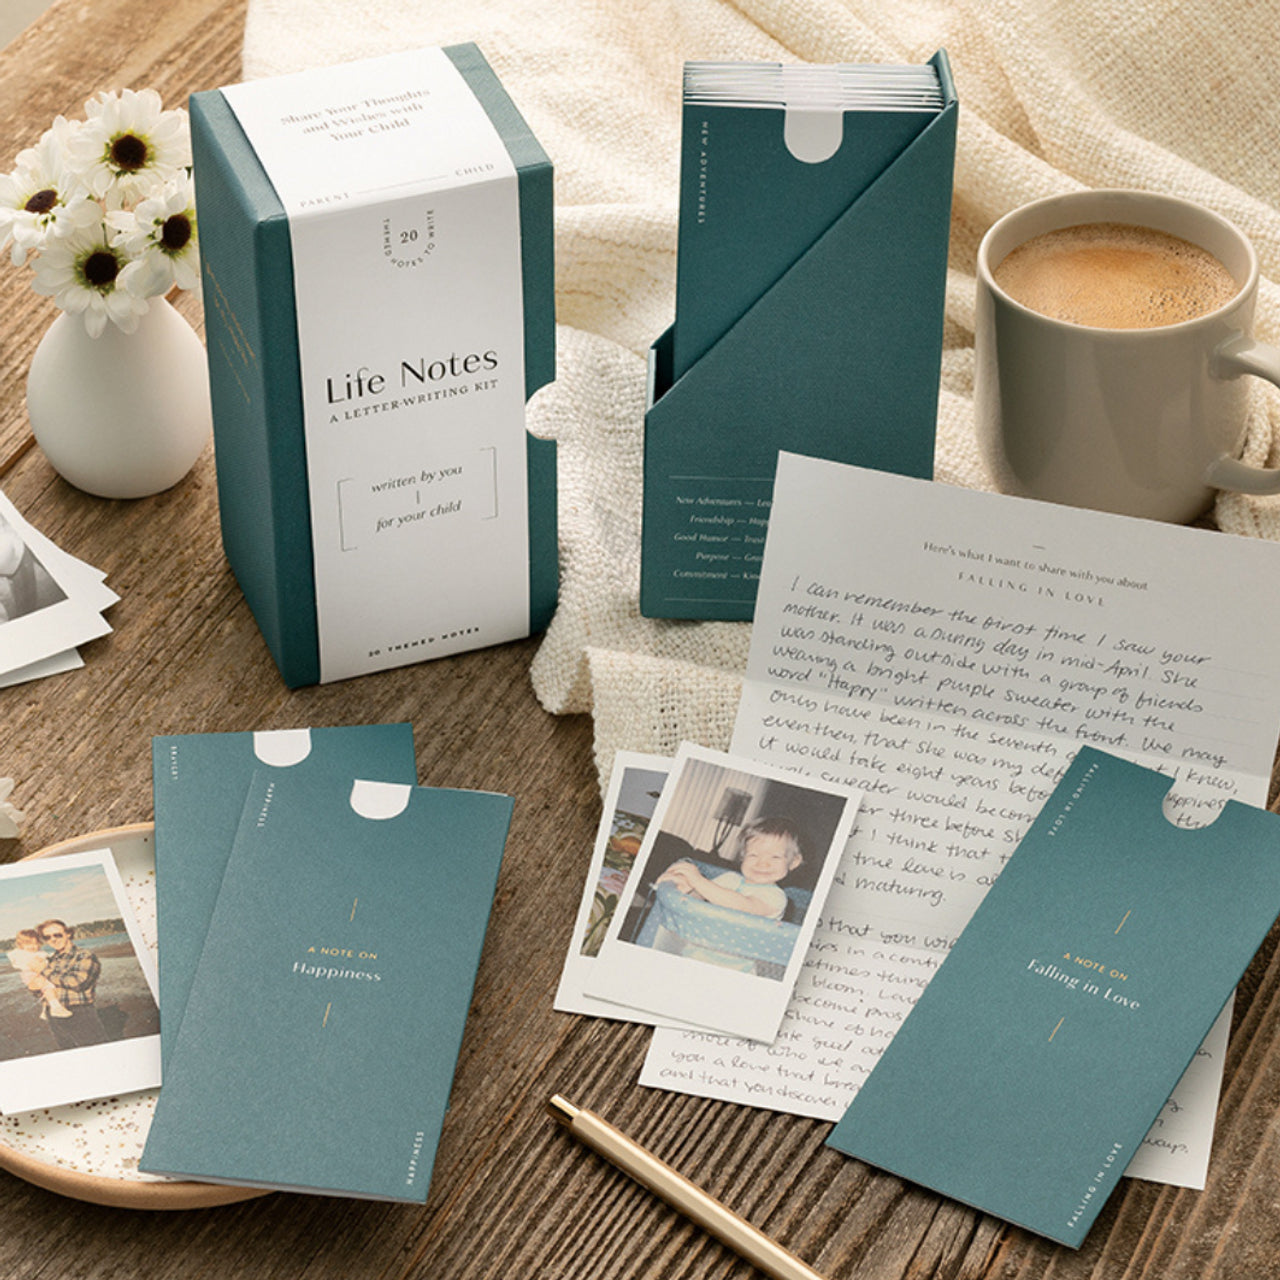 Life Notes- A Letter-Writing Kit Written by You for Your Child